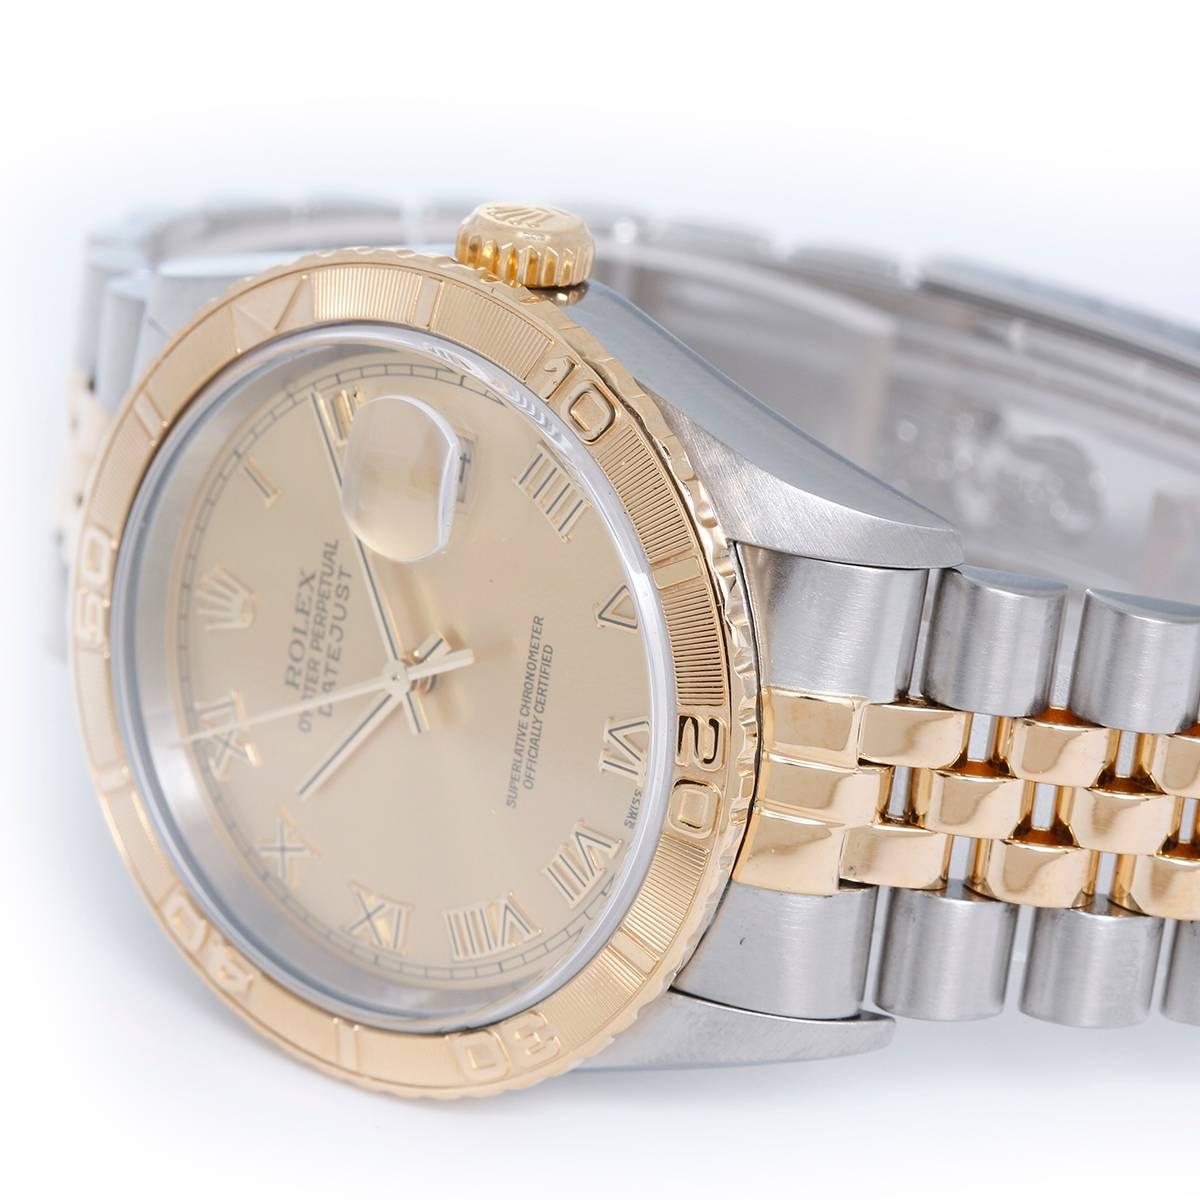 Automatic winding with date; sapphire crystal; 31 jewels. Stainless steel case with 18k yellow gold rotating Thunderbird bezel  (36mm diameter). Champagne dial with Roman numerals. Stainless steel and 18k yellow gold Oyster bracelet. Pre-owned with